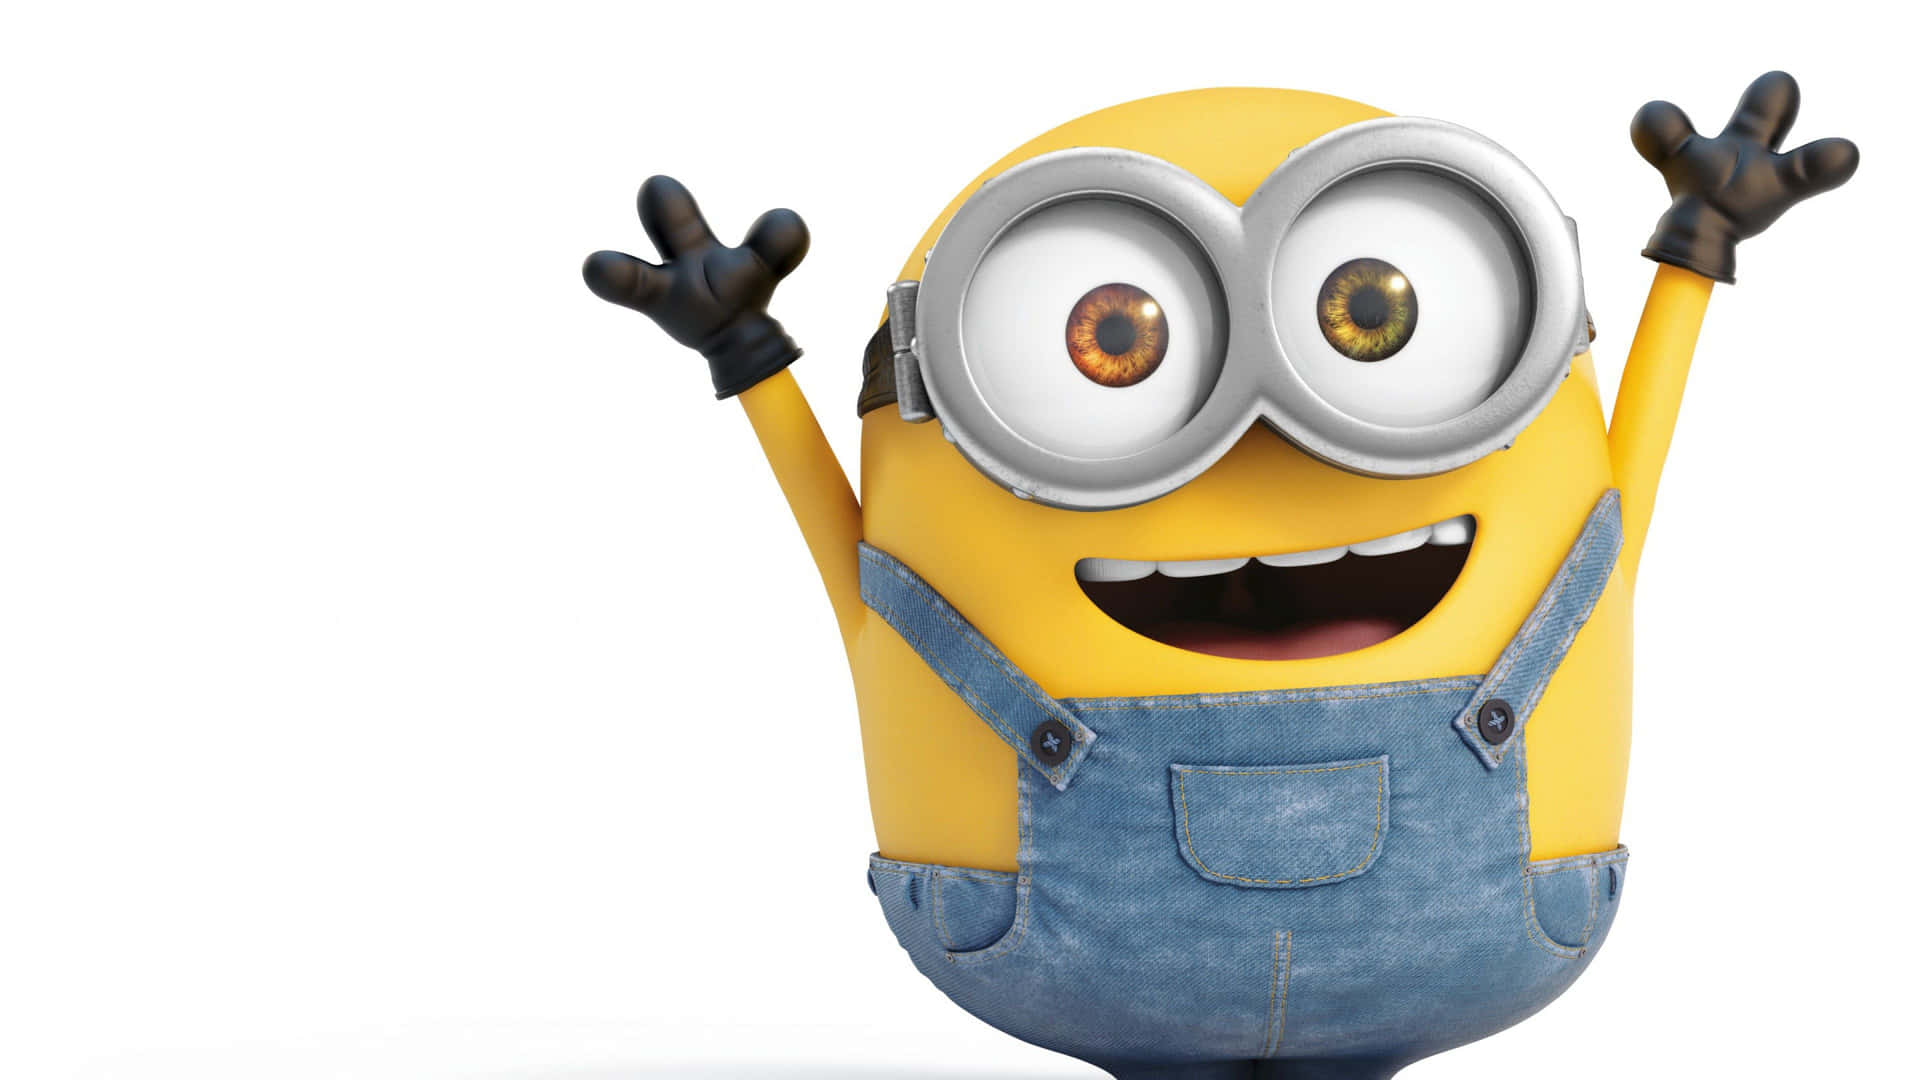 Celebrate the misadventures of the Minions